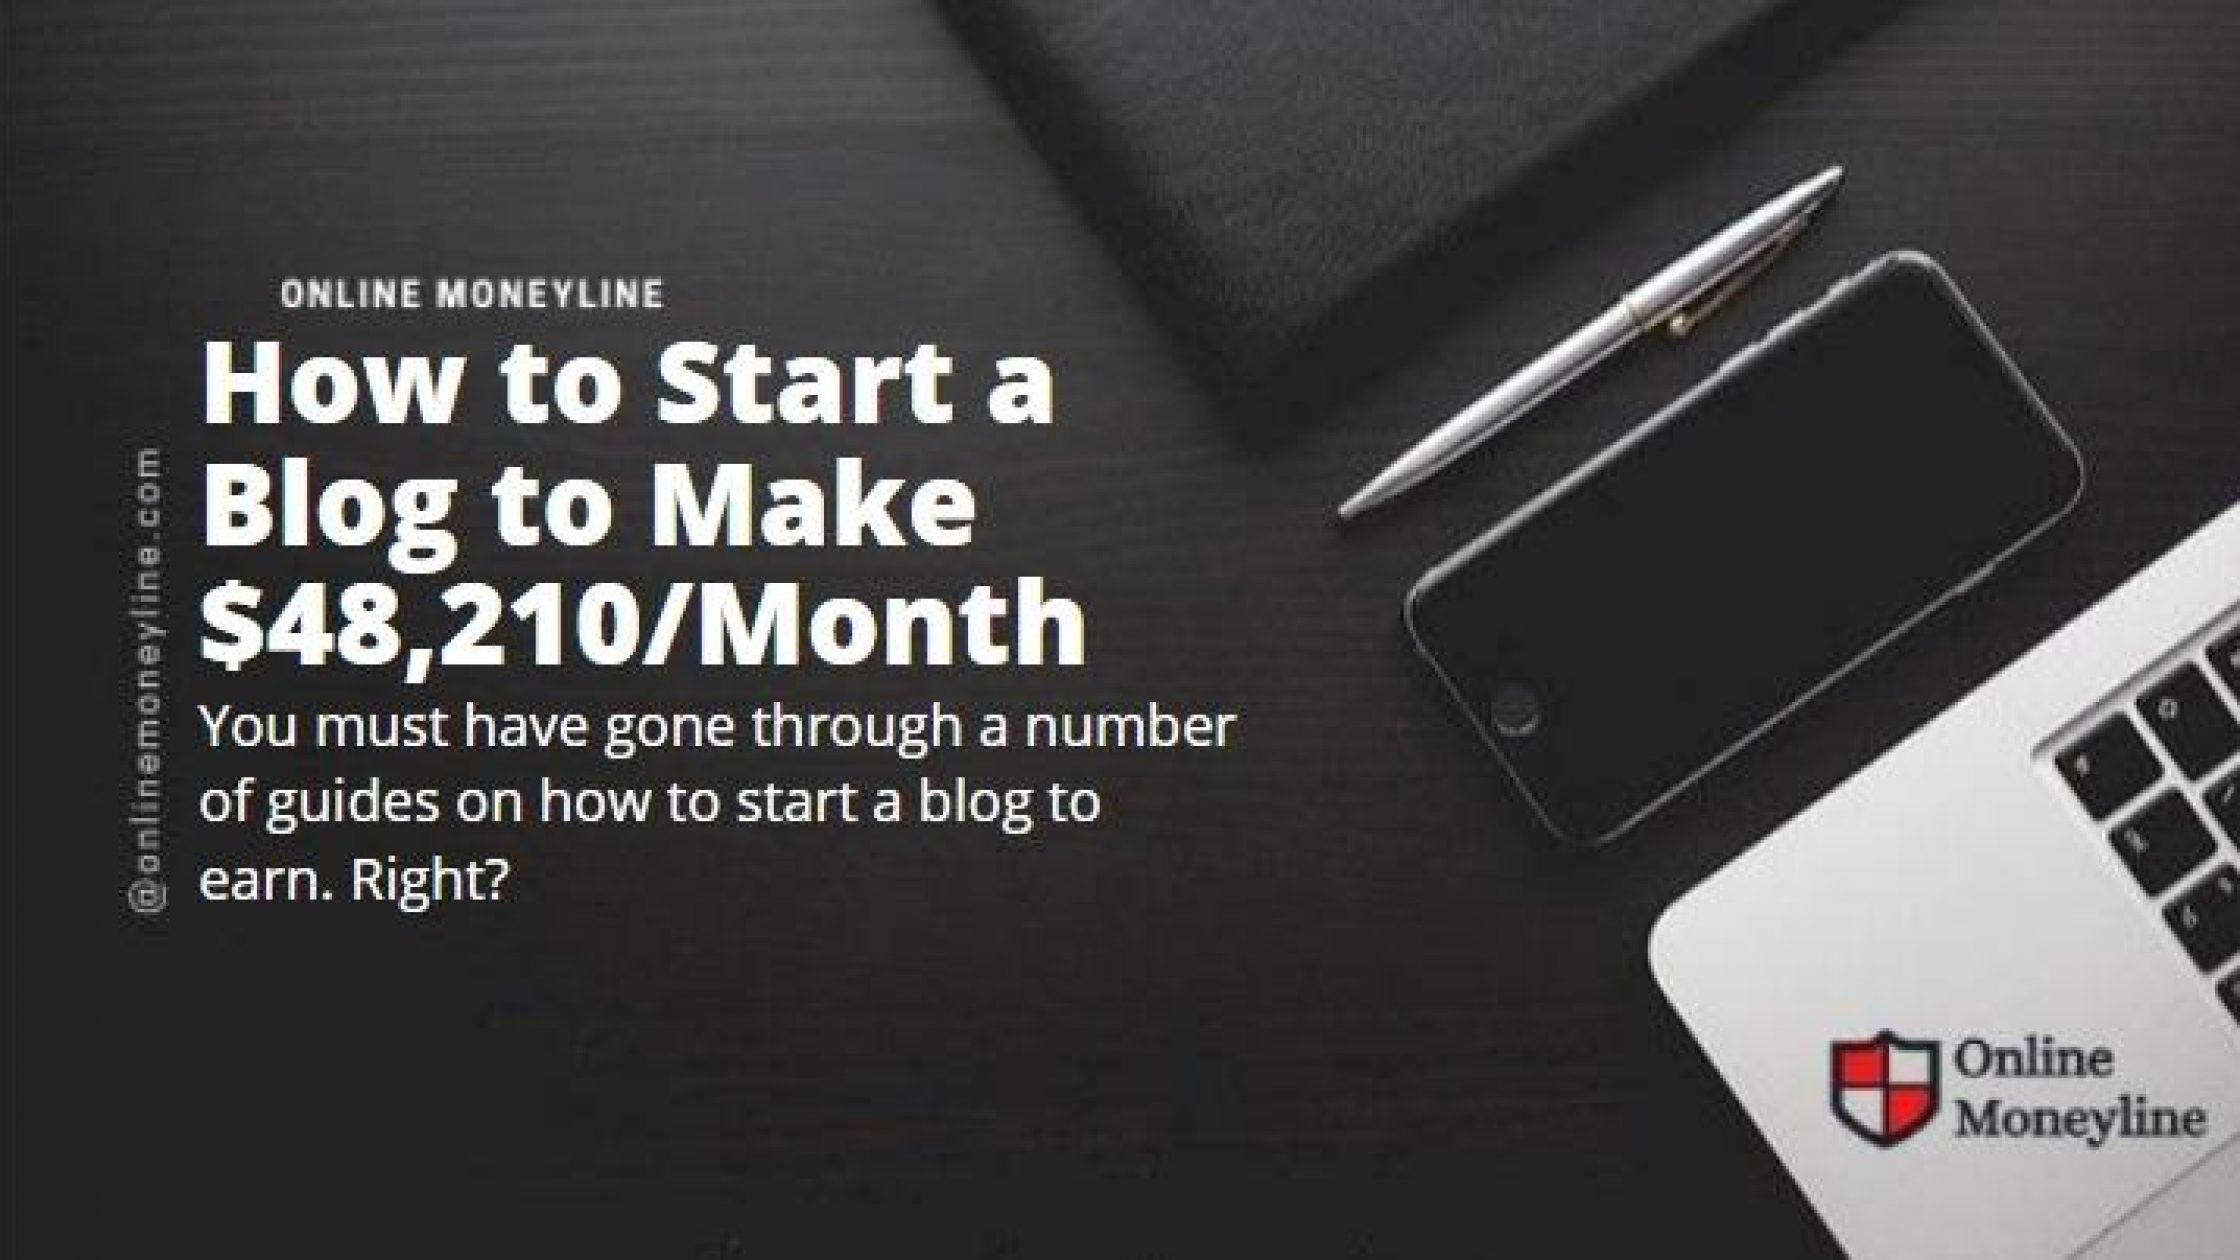 How to Start a Blog to Make $48,210/Month